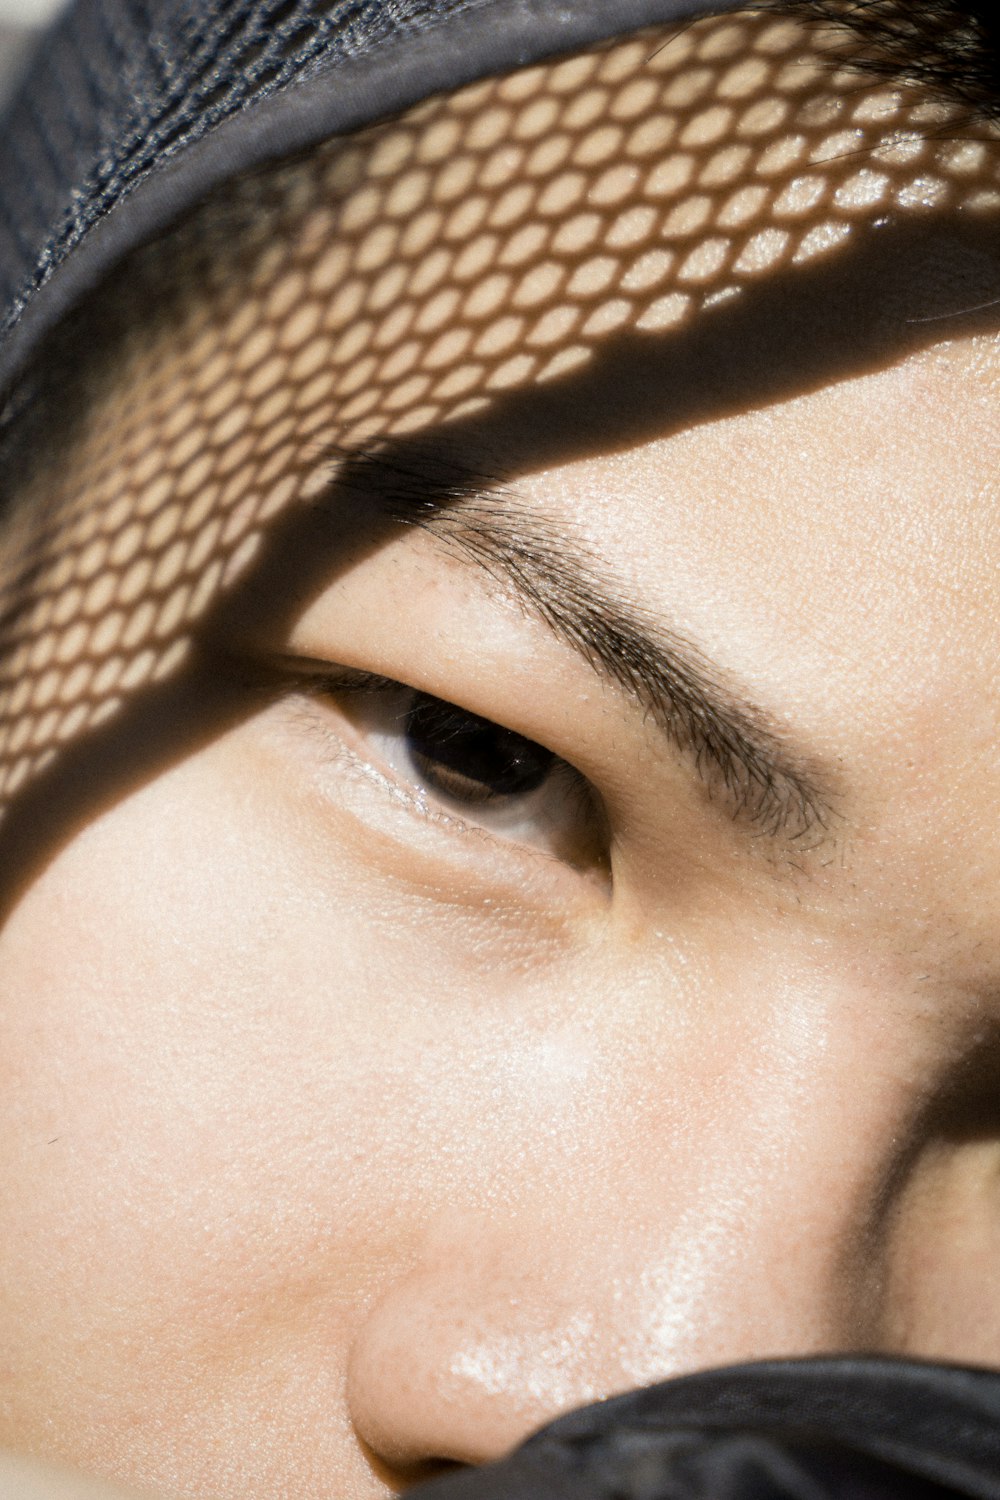 a close up of a person wearing a hat